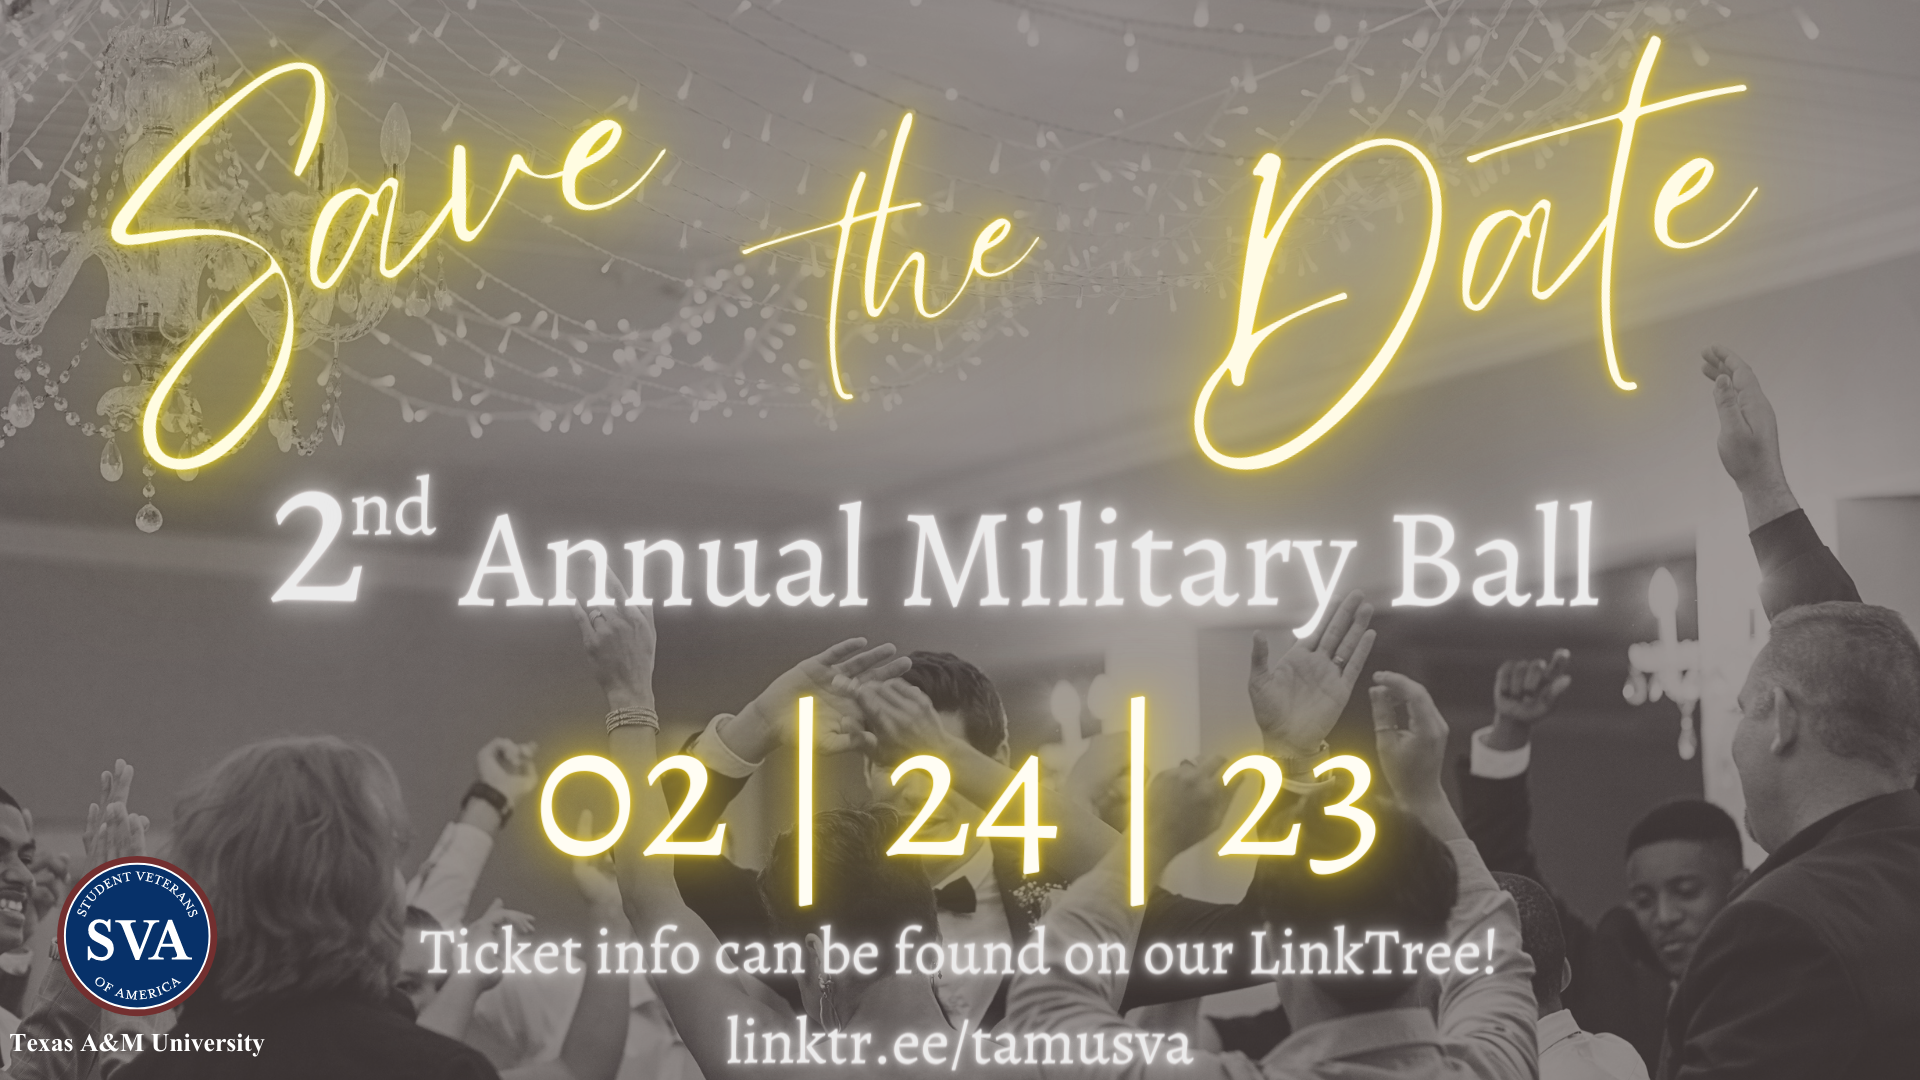 Save the Date for the 2nd Annual Military Ball on 02/24/23. Visit Linktree for ticket link.